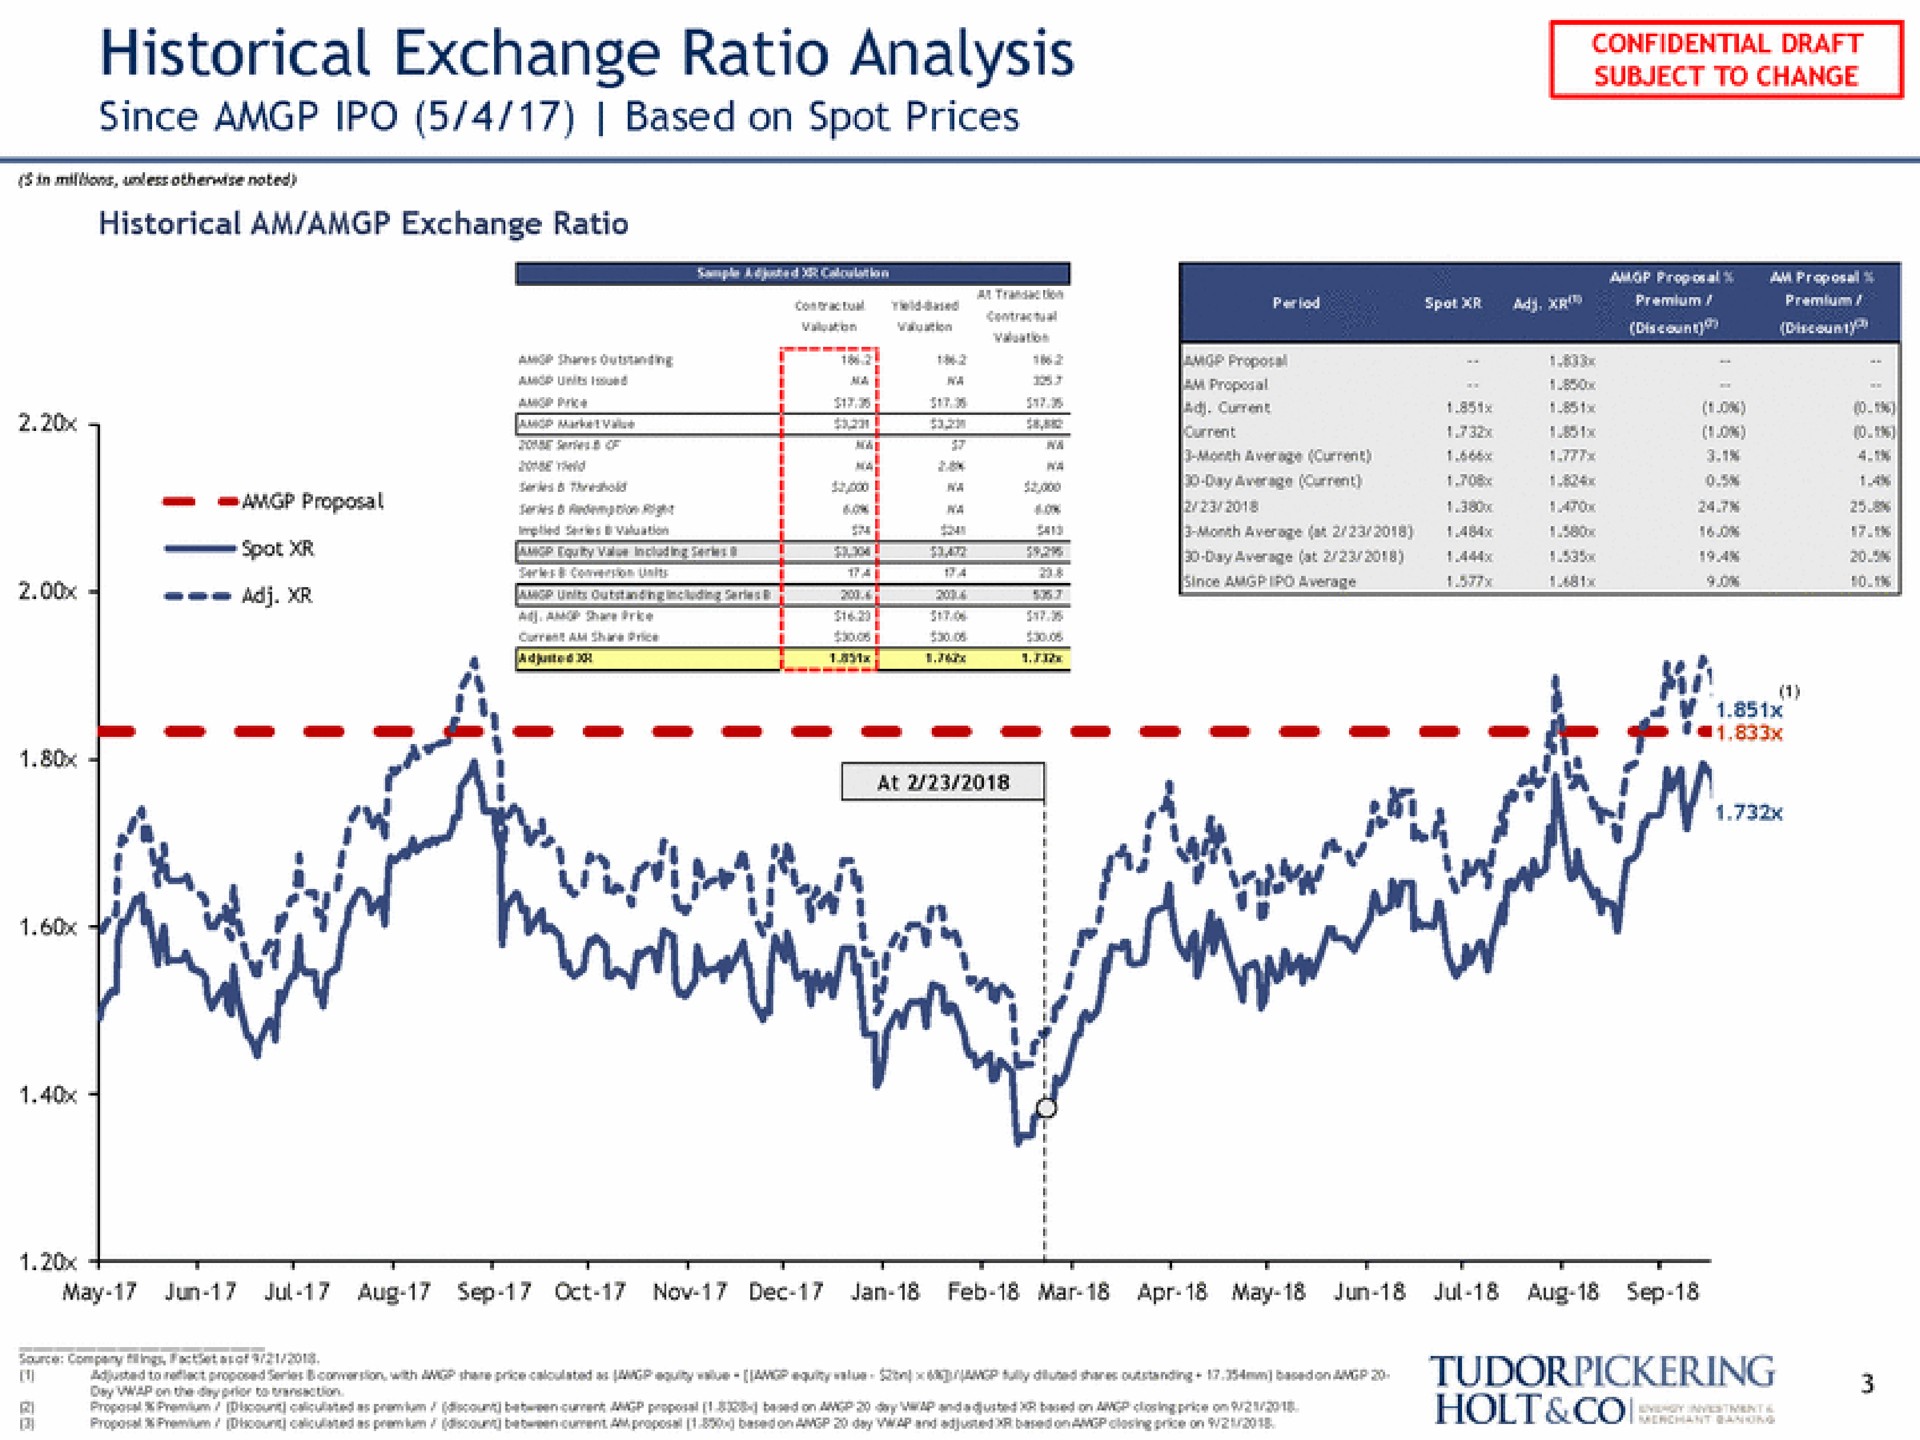 historical exchange ratio analysis since based on spot prices a ret | Tudor, Pickering, Holt & Co